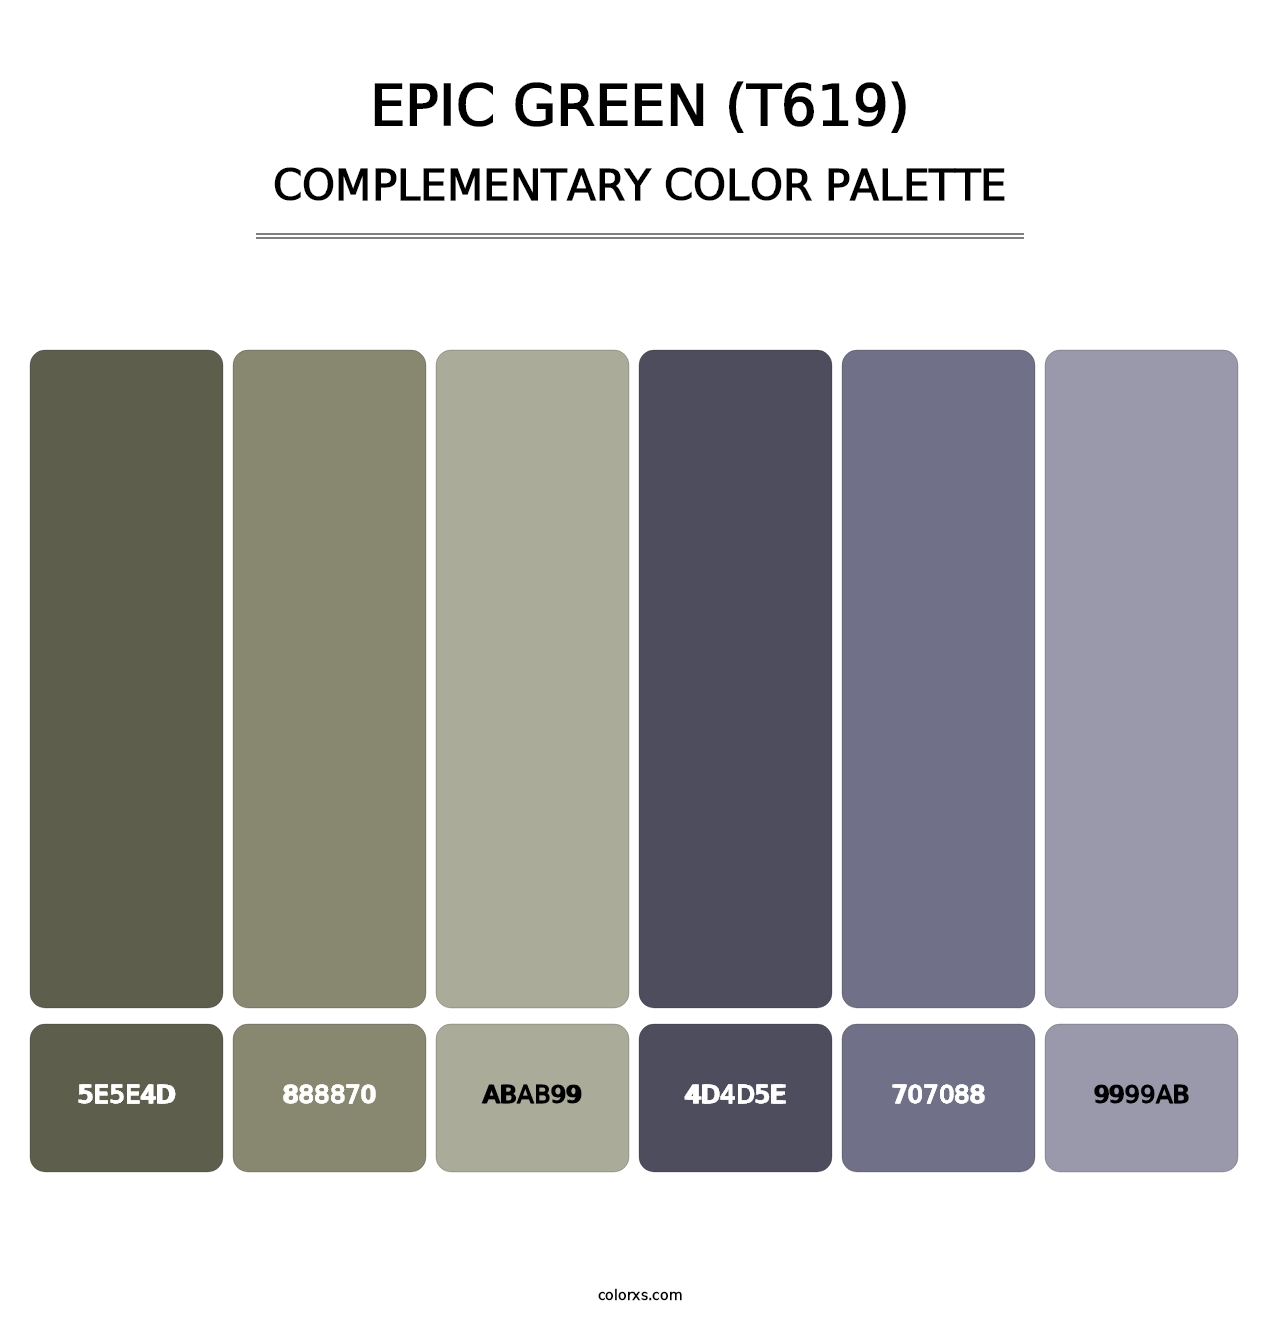 Epic Green (T619) - Complementary Color Palette